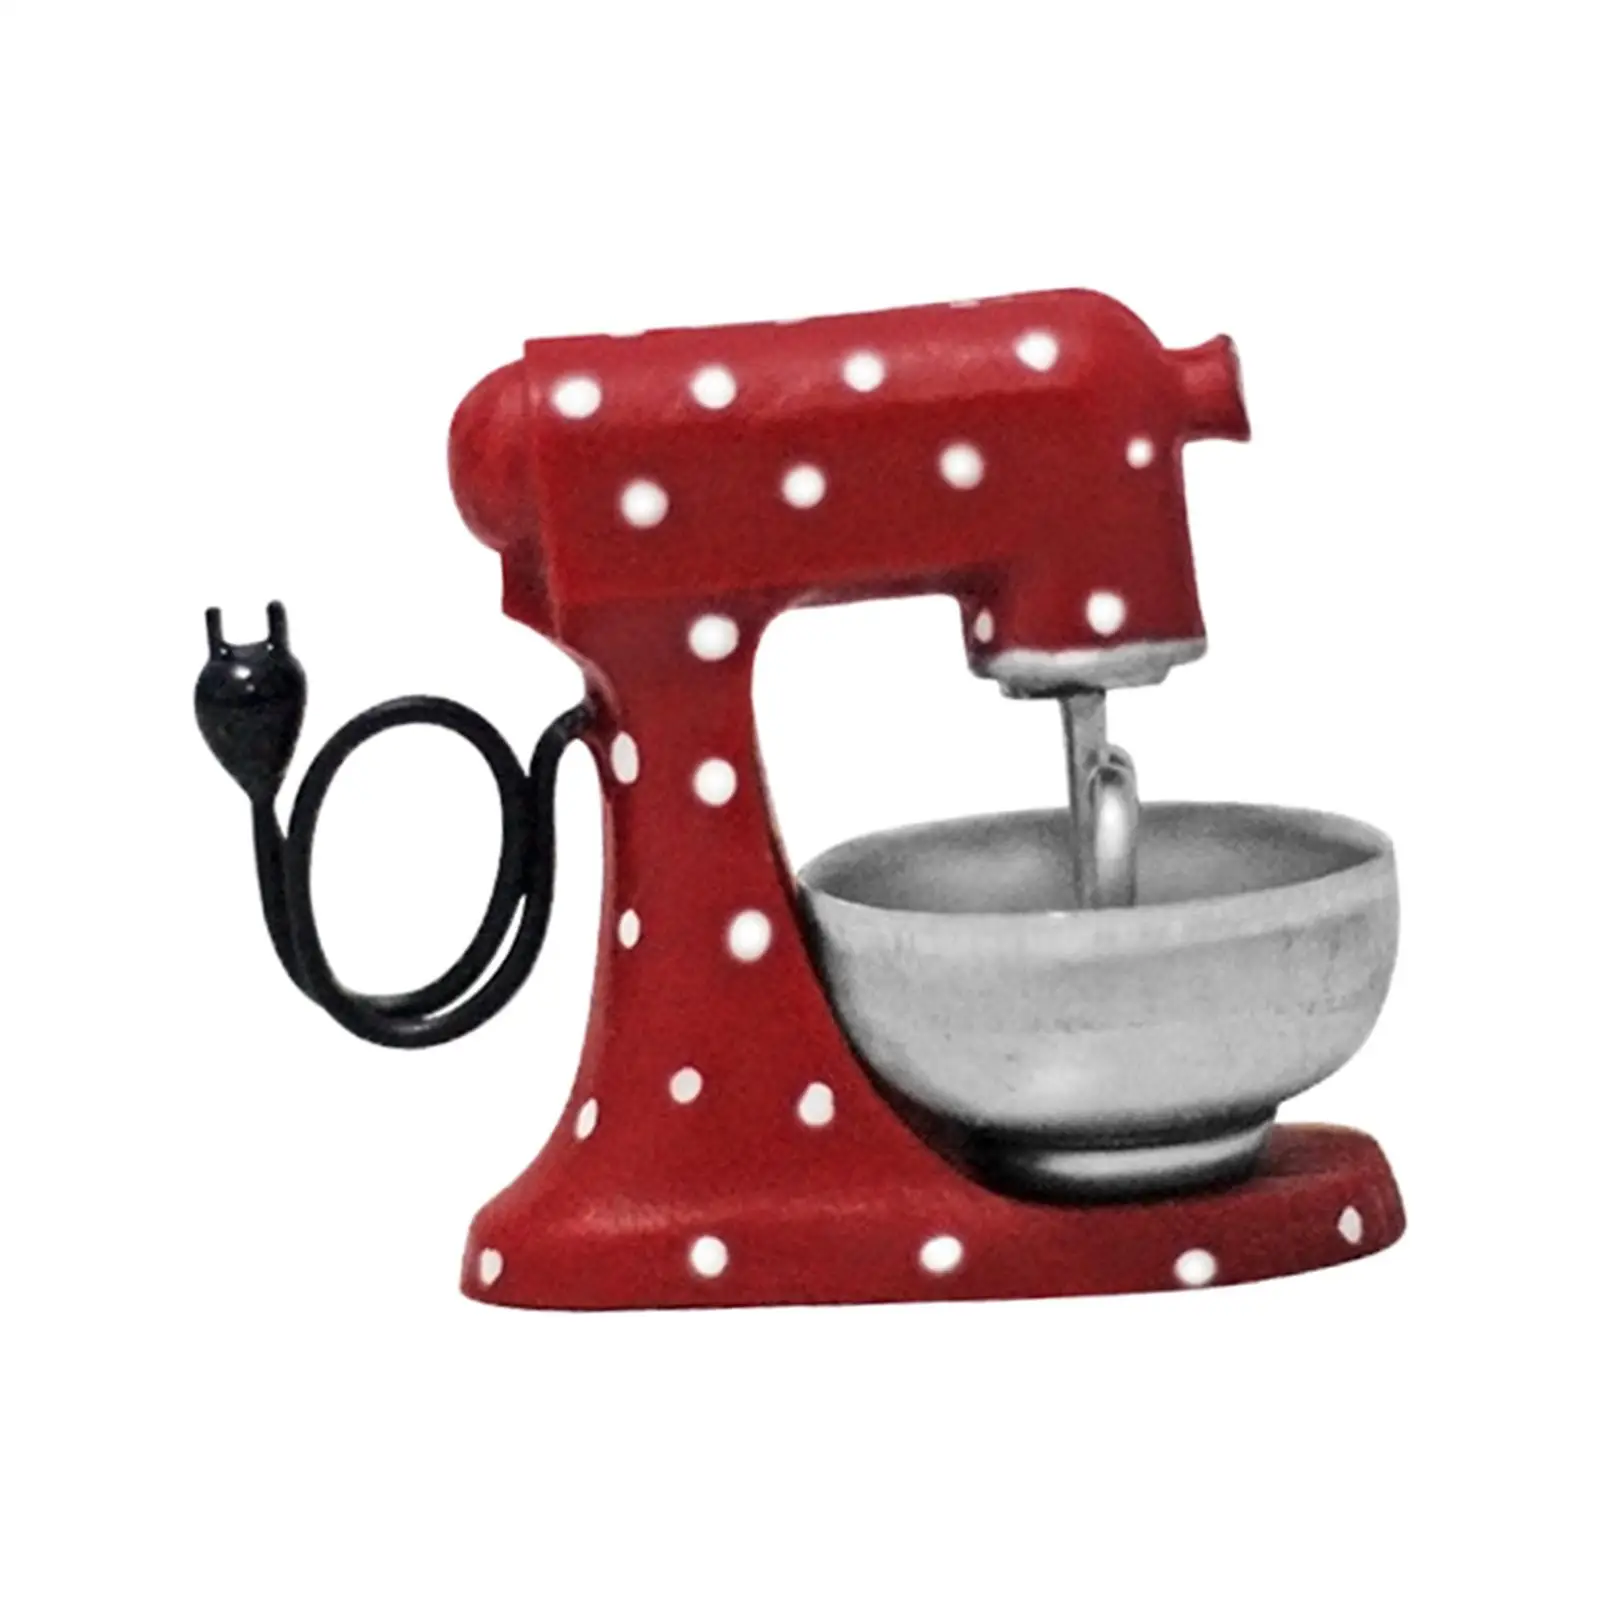 Micro Mixer Machine Dollhouse Crafts Simulation Model Accessories Kitchen Retro Style Decorative Furniture Modern 1/12 for Gifts